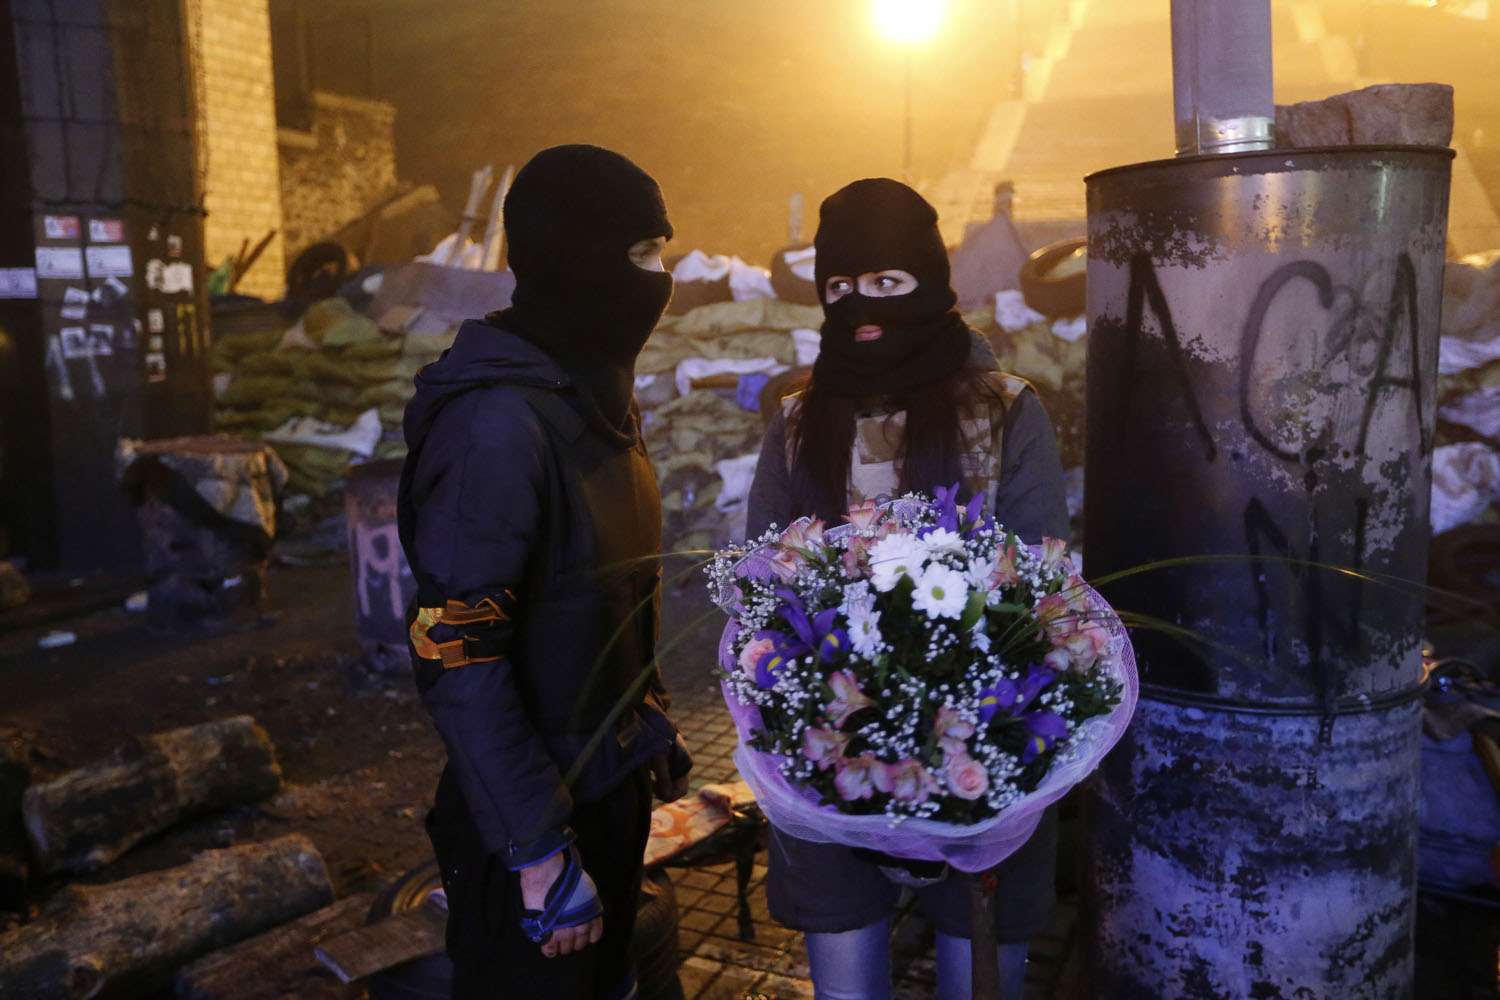 Feb. 13, 2014. An activist from the  Right Sector  anti-government protest group presents a bouquet of flowers to his girlfriend in front of fellow activists near the site of previous clashes with riot police in Kiev, Ukraine.